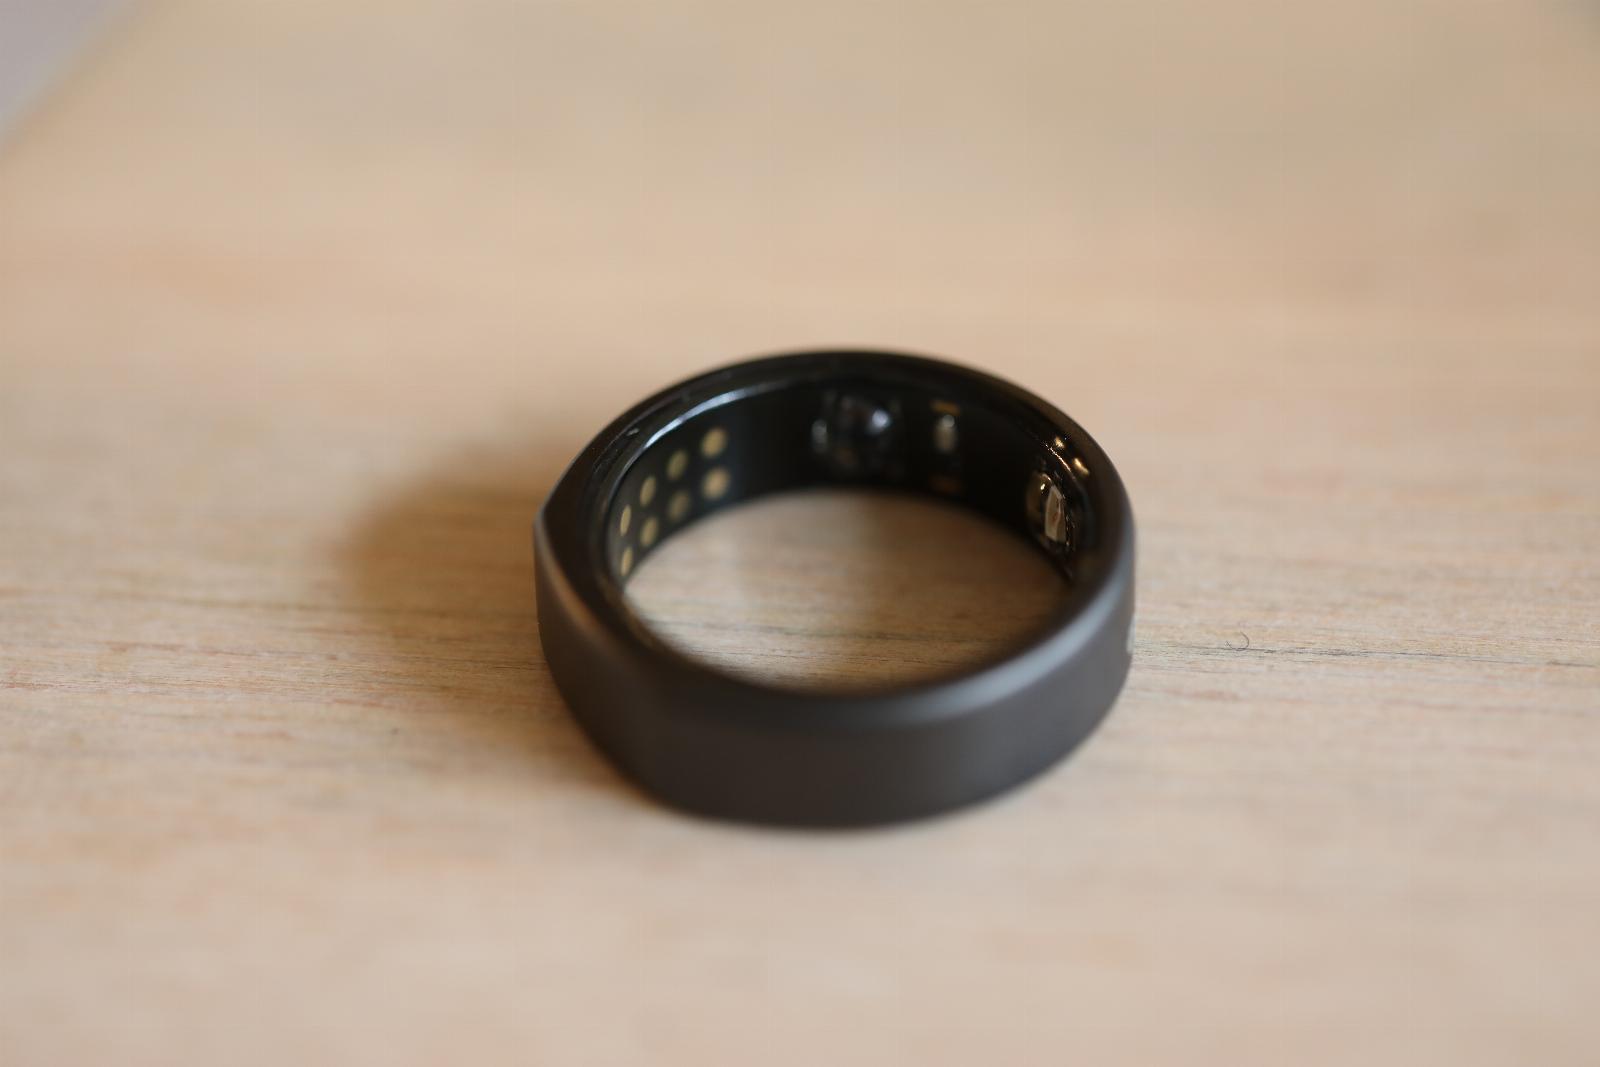 Samsung is taking on Oura with the Galaxy Ring